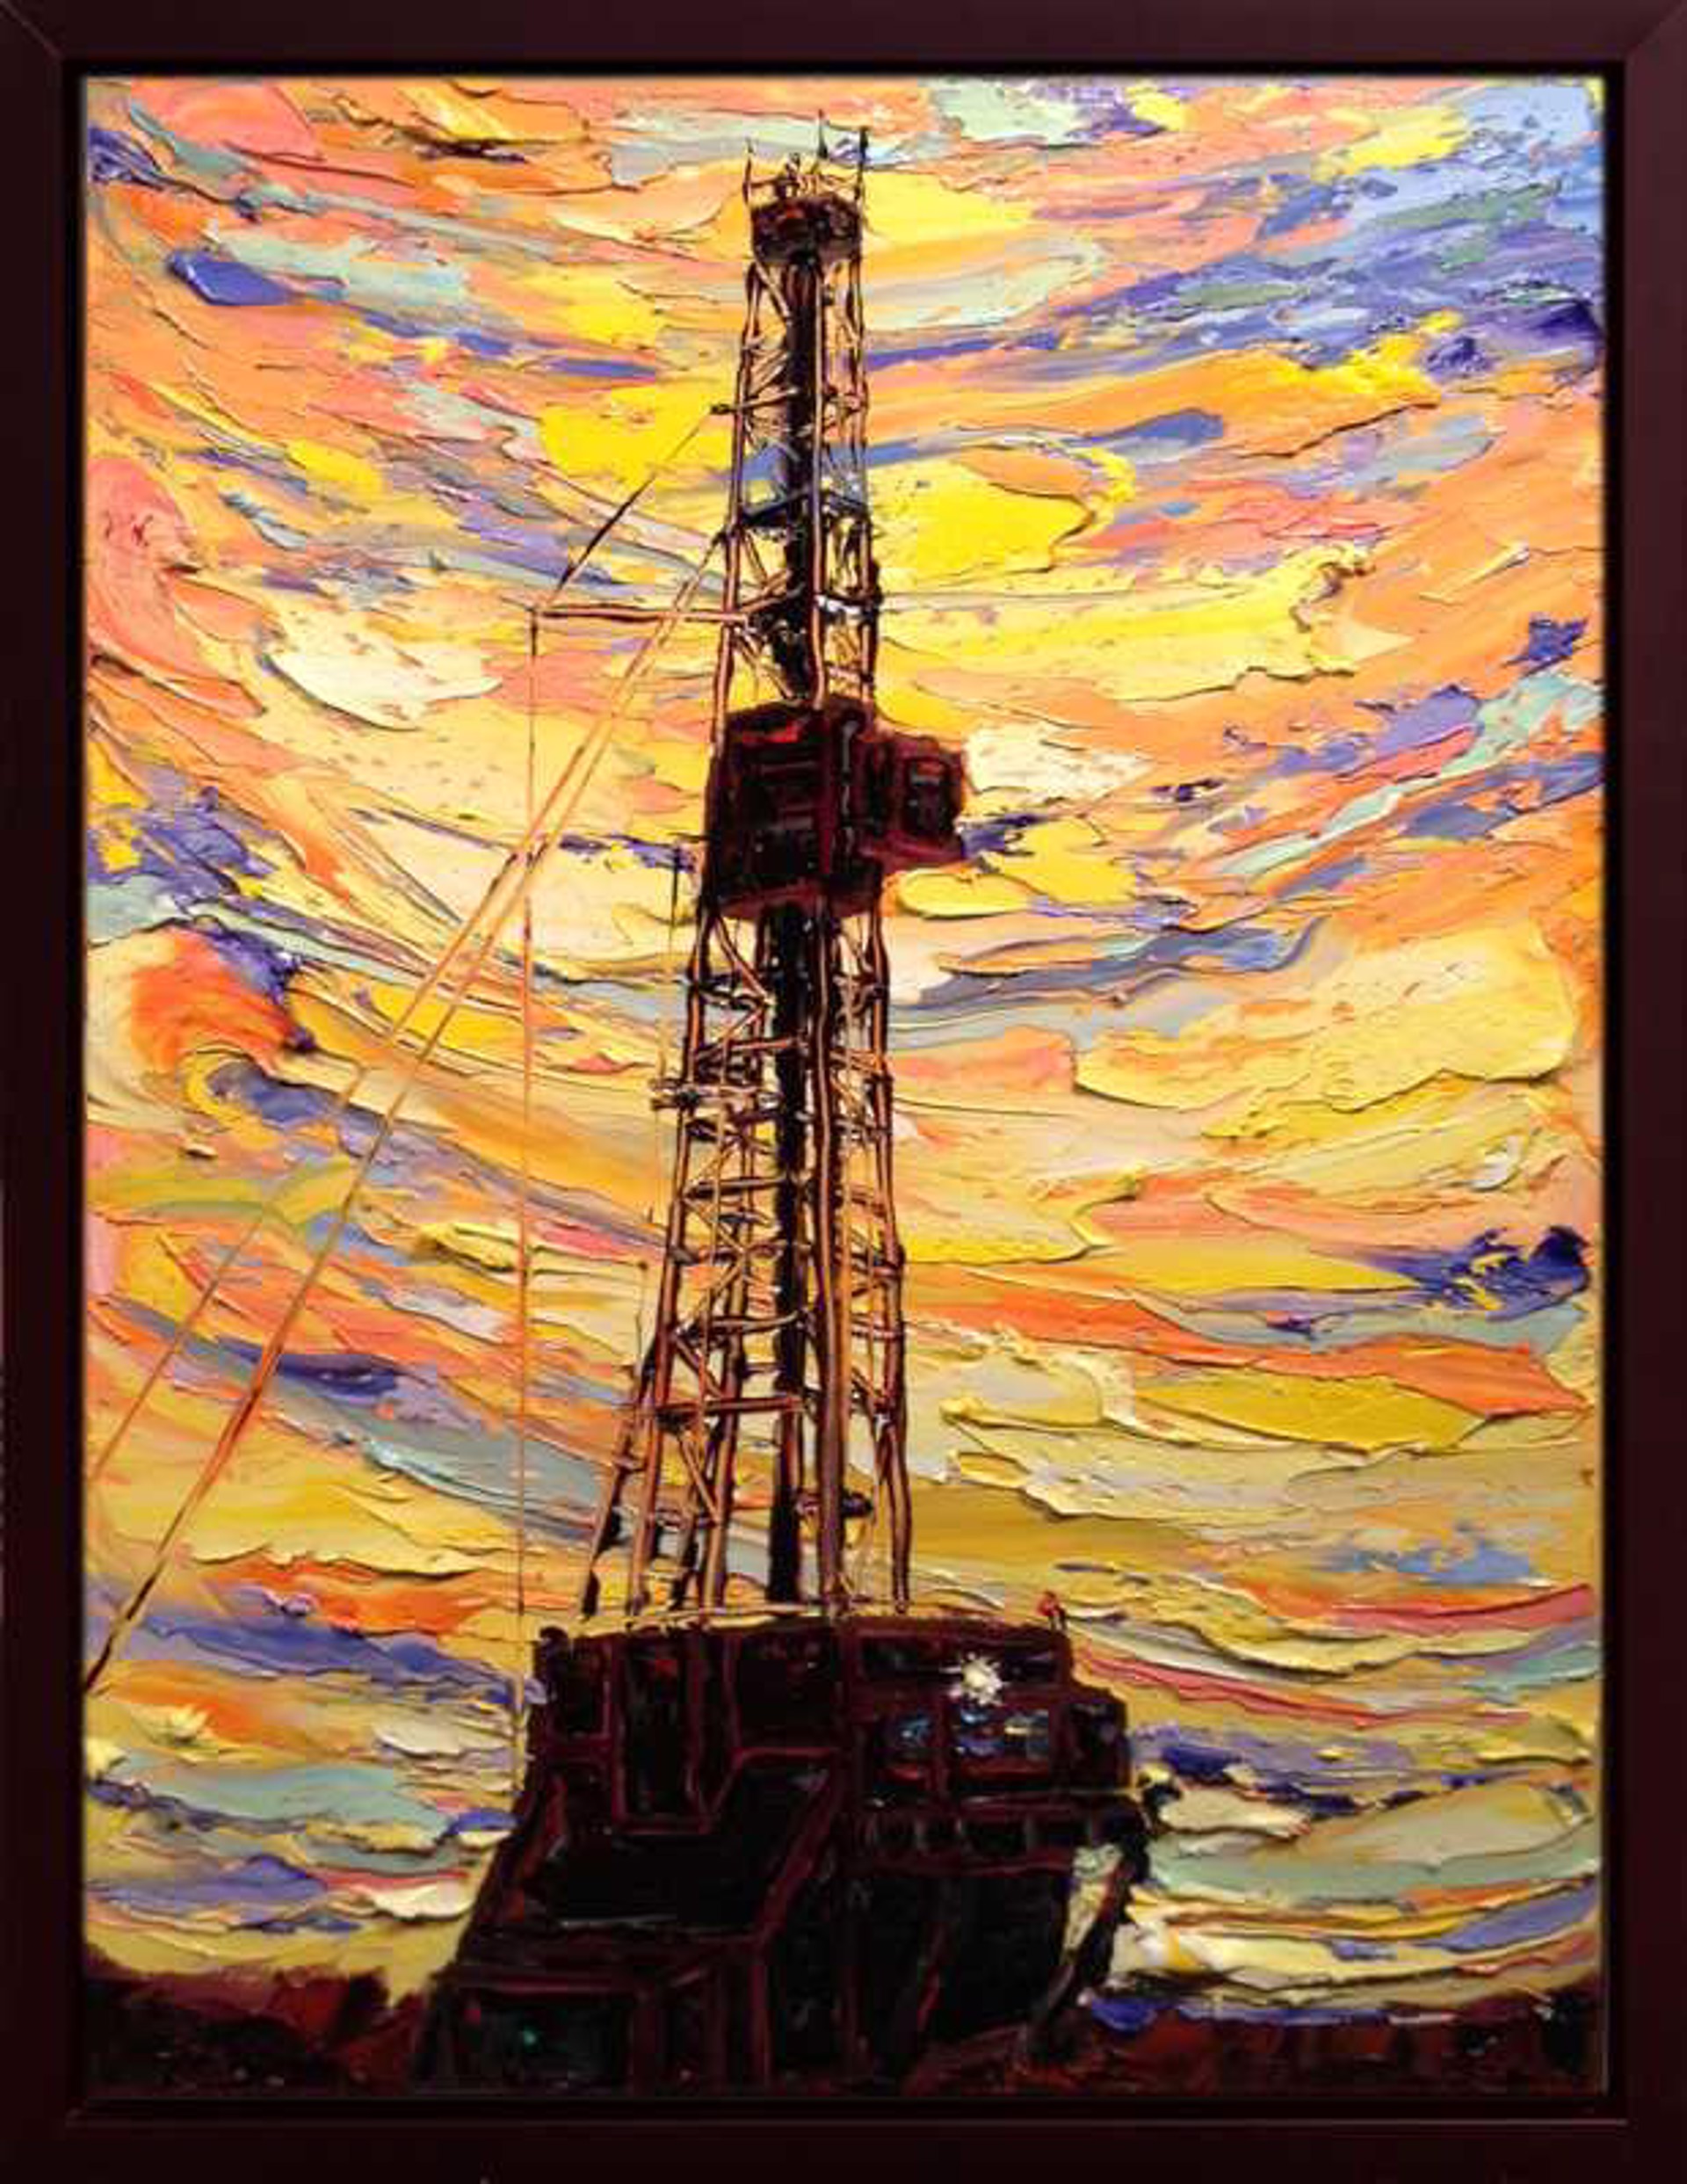 Wildcatter's Sunset by JD Miller